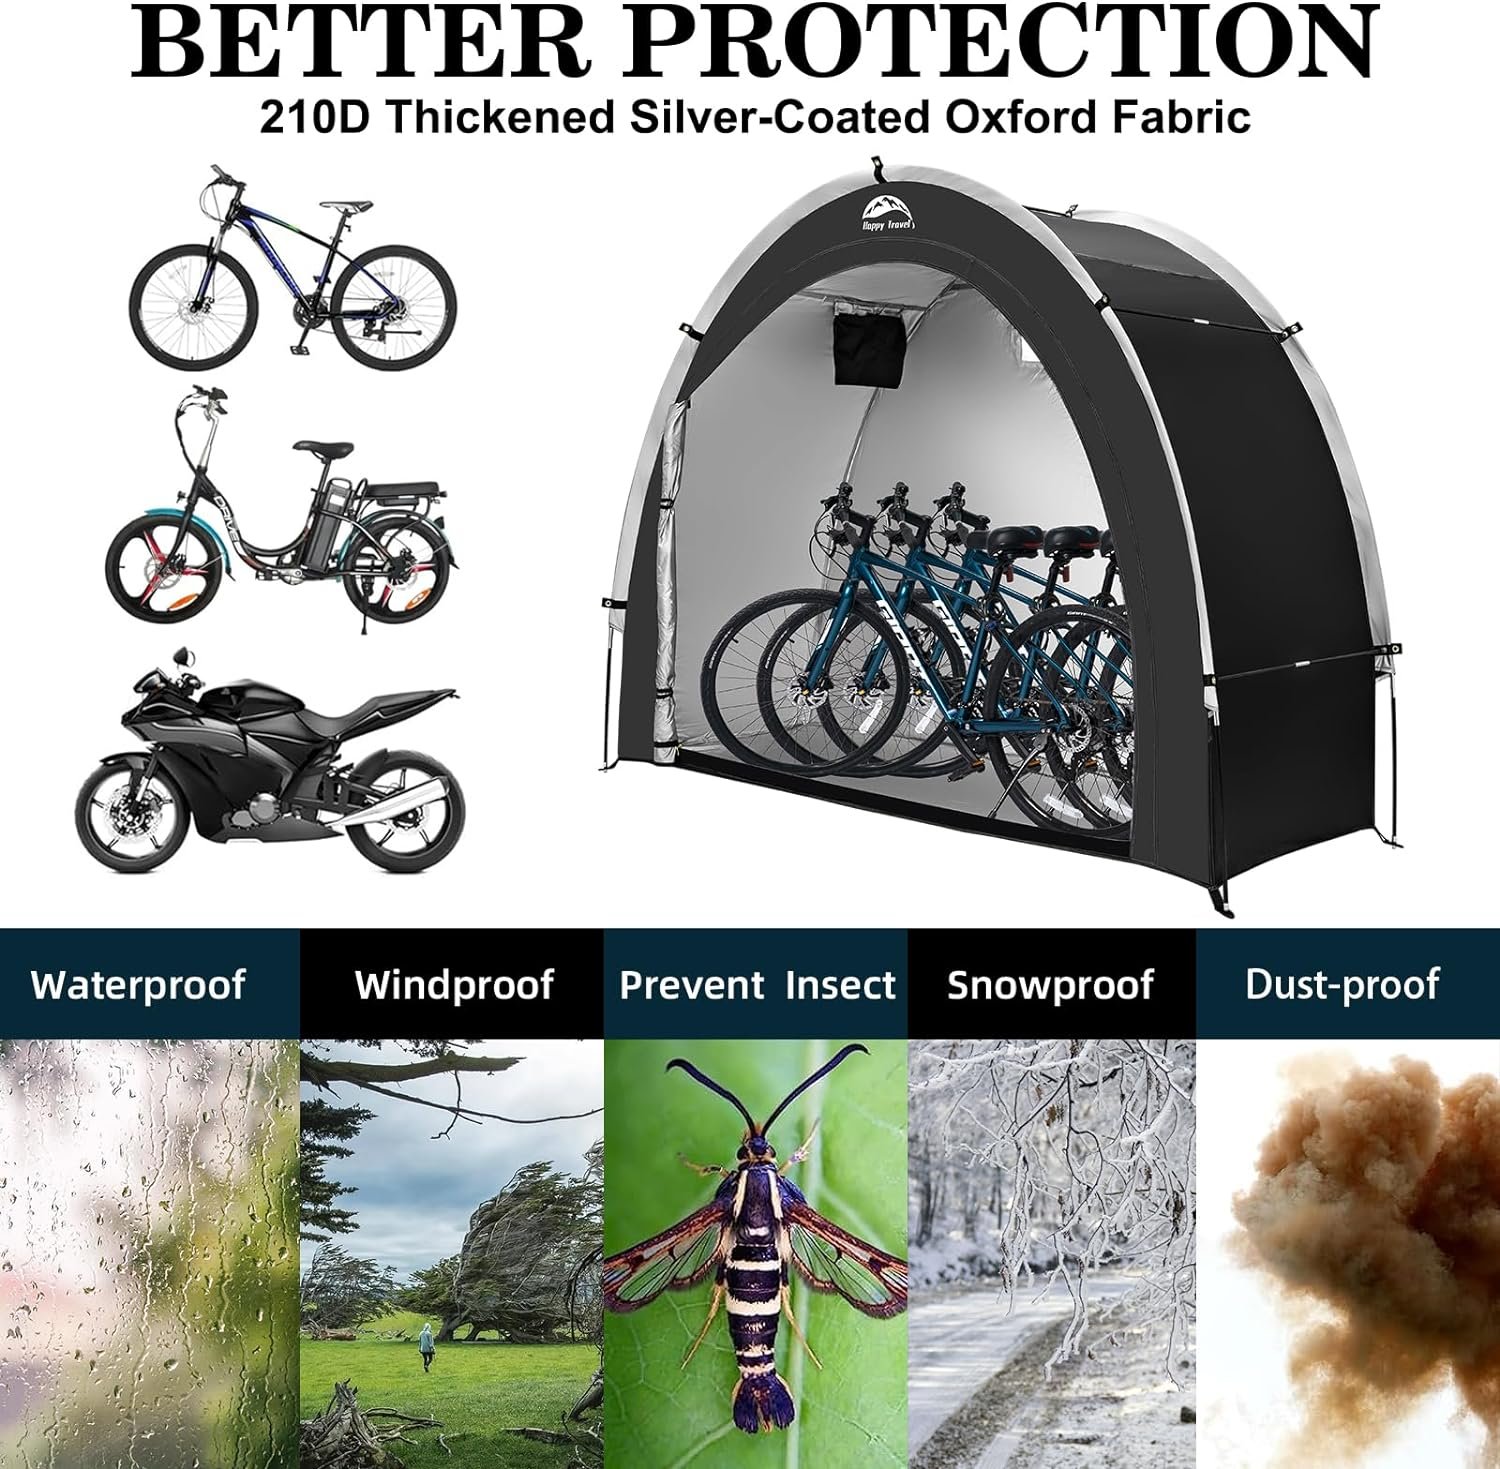 Bike Storage Shed Tent Review